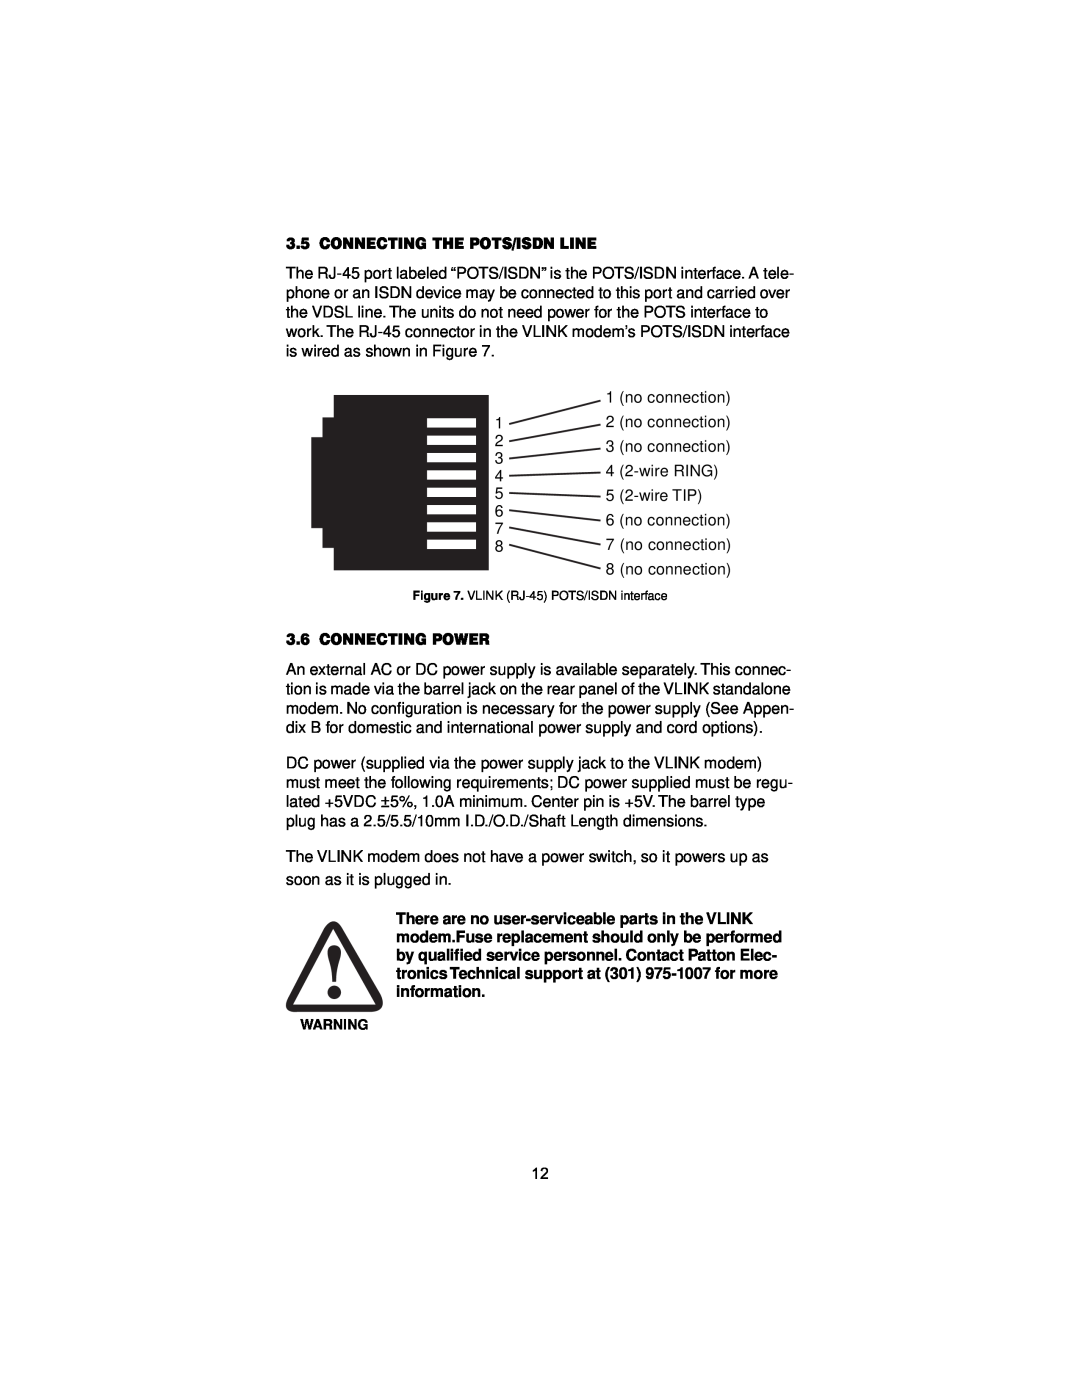 Patton electronic 1068 user manual Connecting The Pots/Isdn Line, Connecting Power, VLINK RJ-45 POTS/ISDN interface 